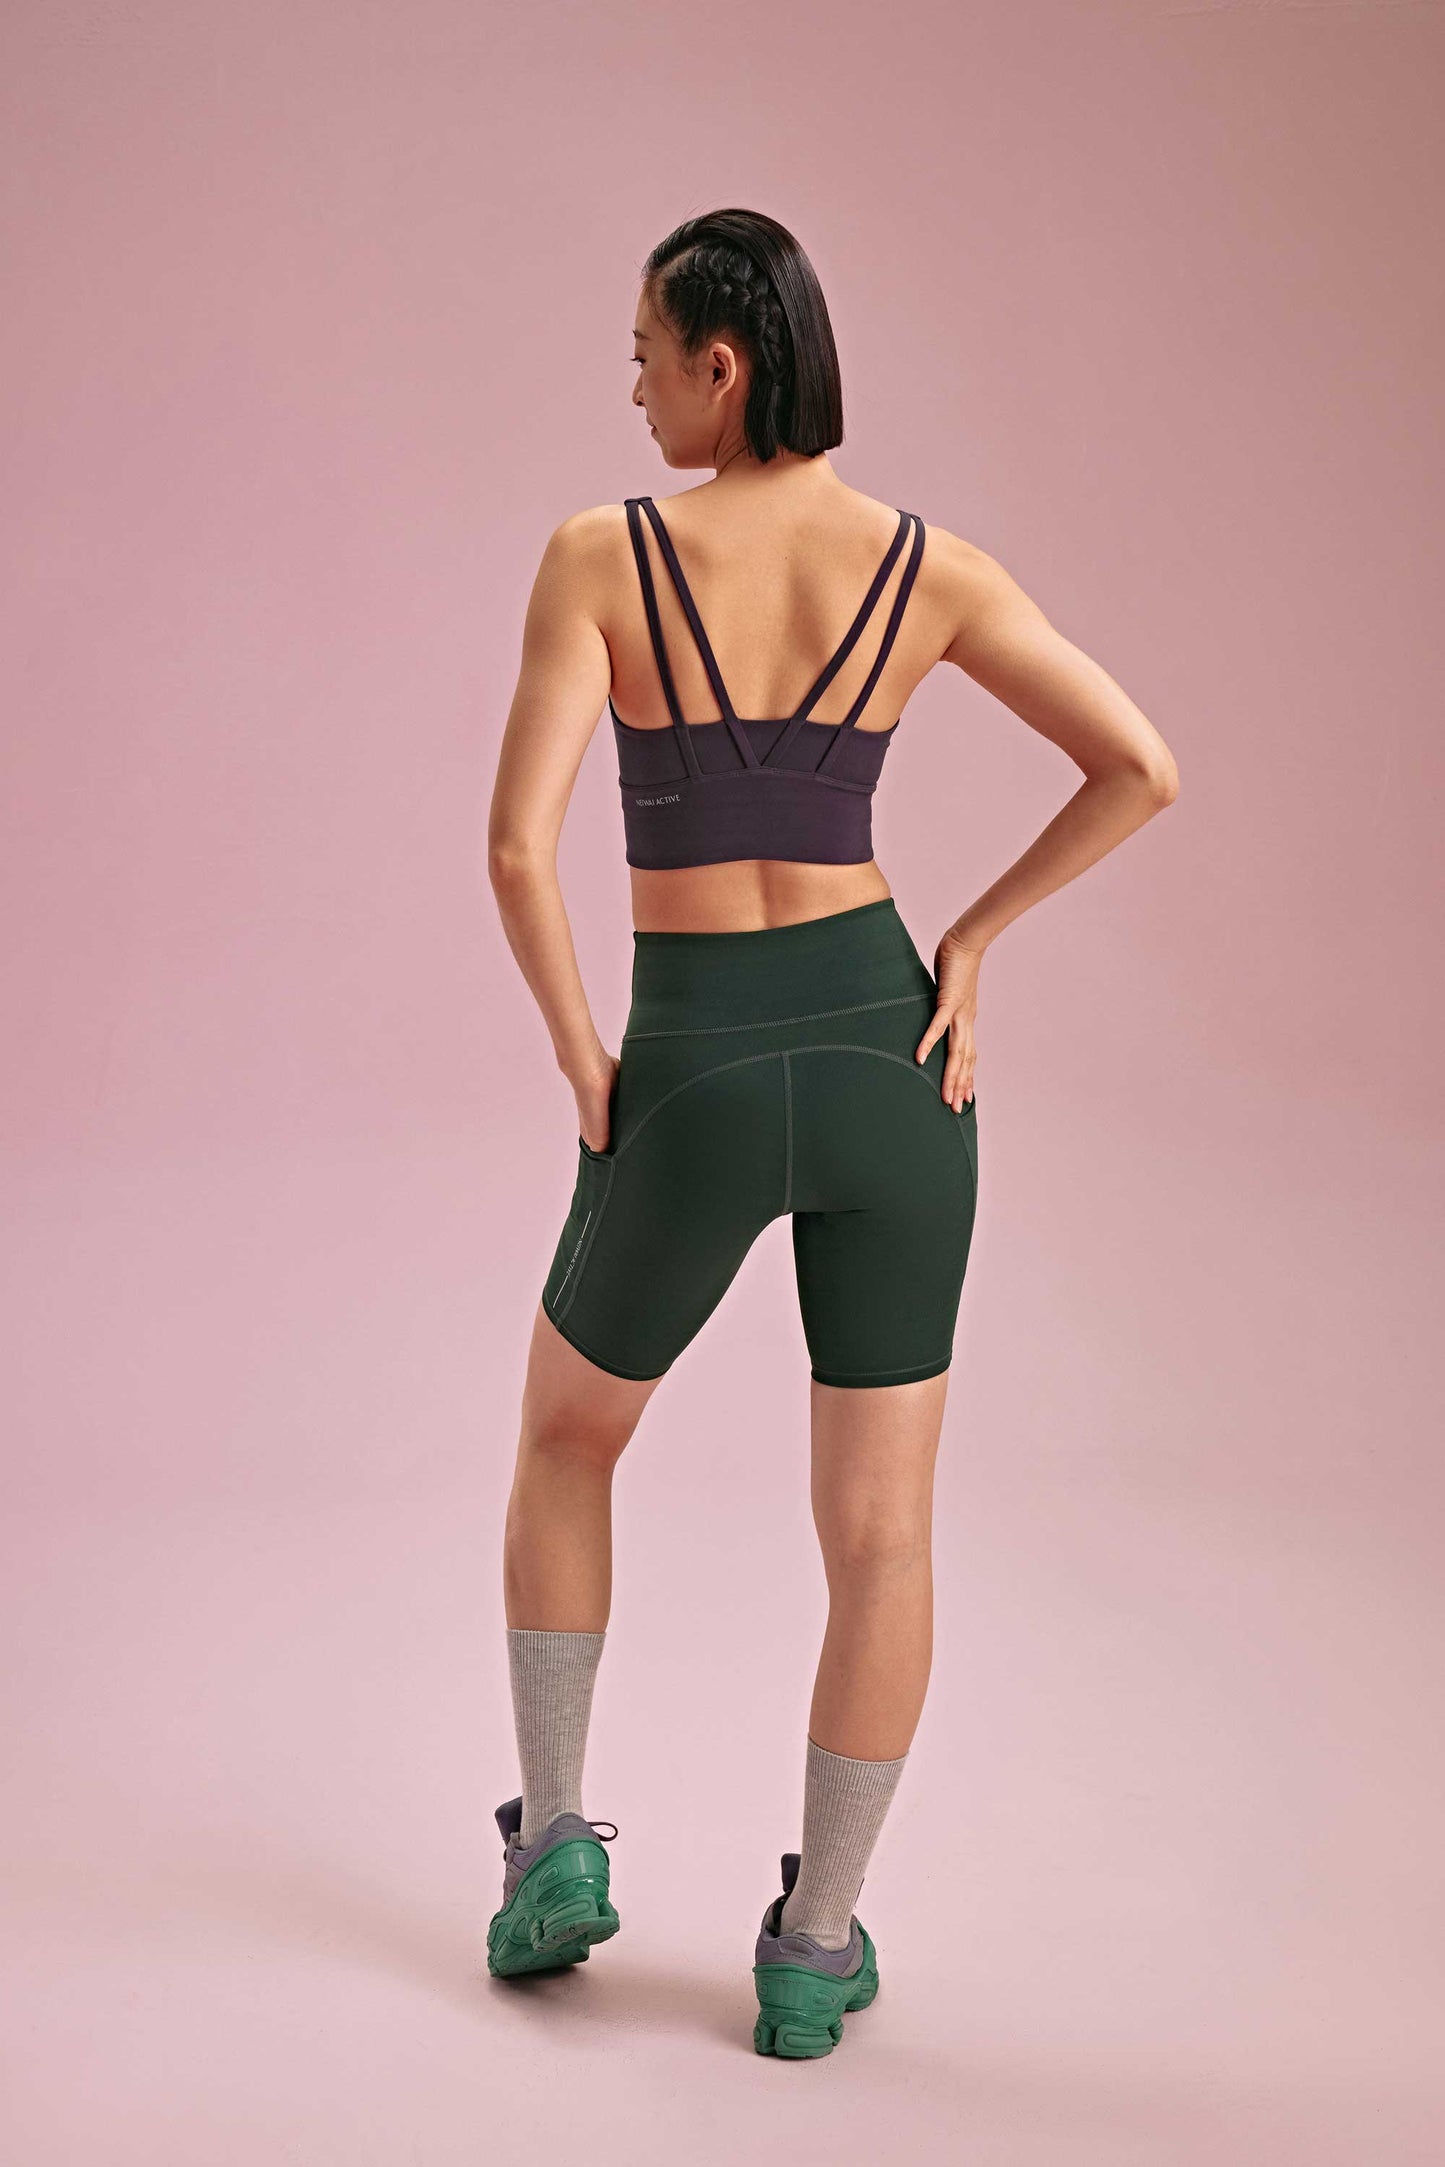 back of a woman wearing a black sports bra and green biker shorts. pair with grey socks and green shoes.